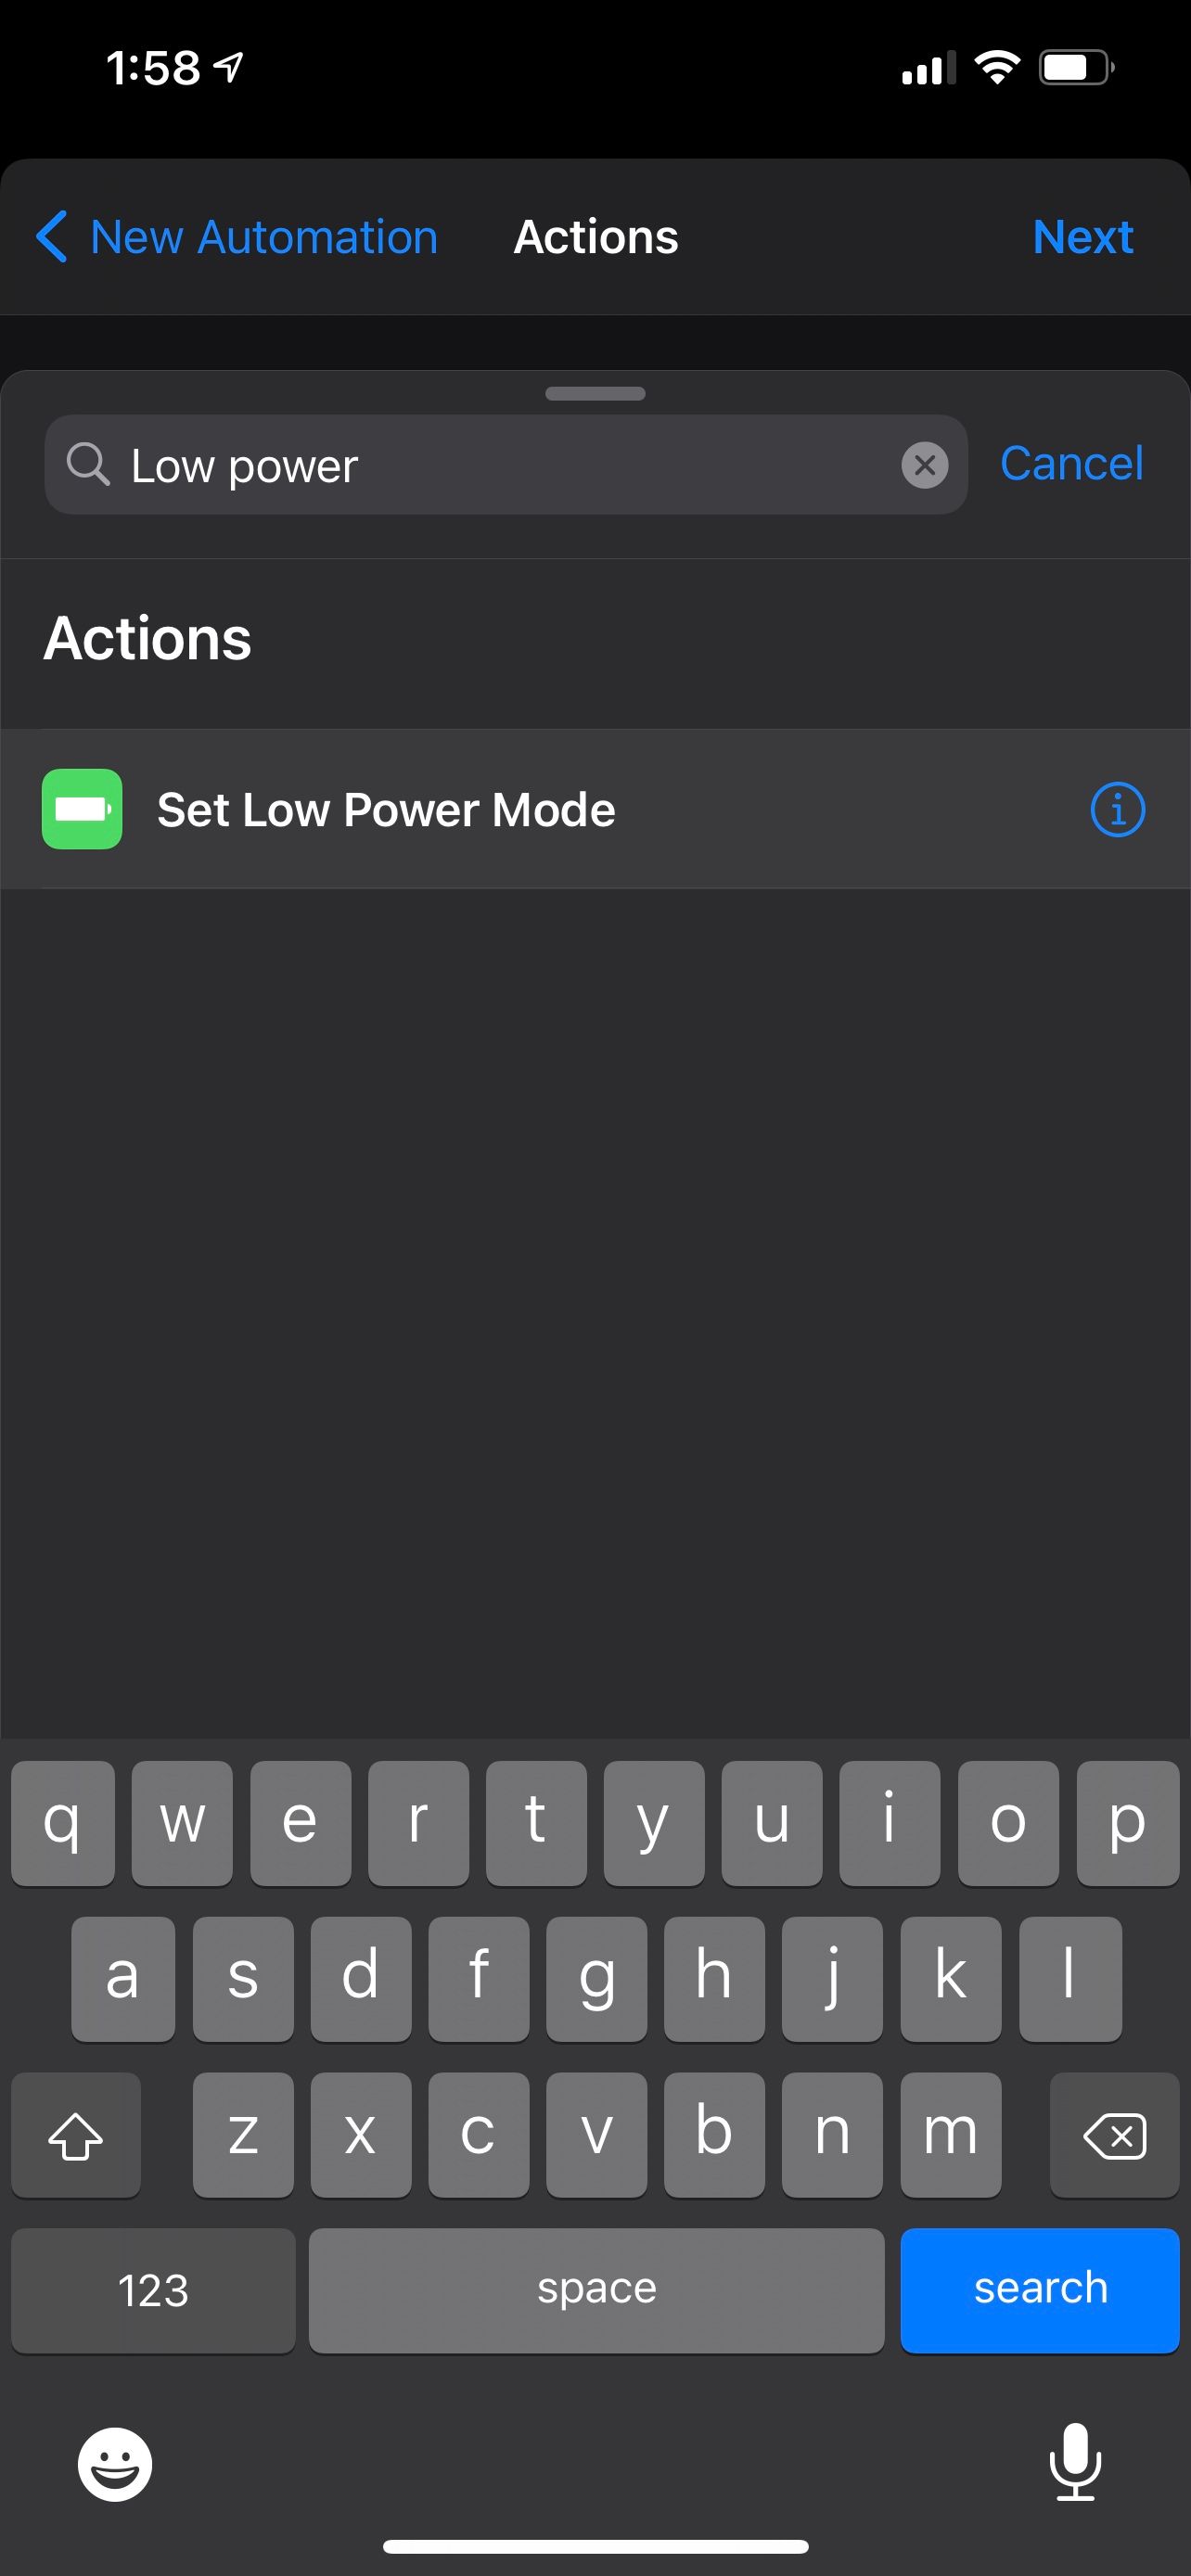 Automation action search for Set Low Power Mode